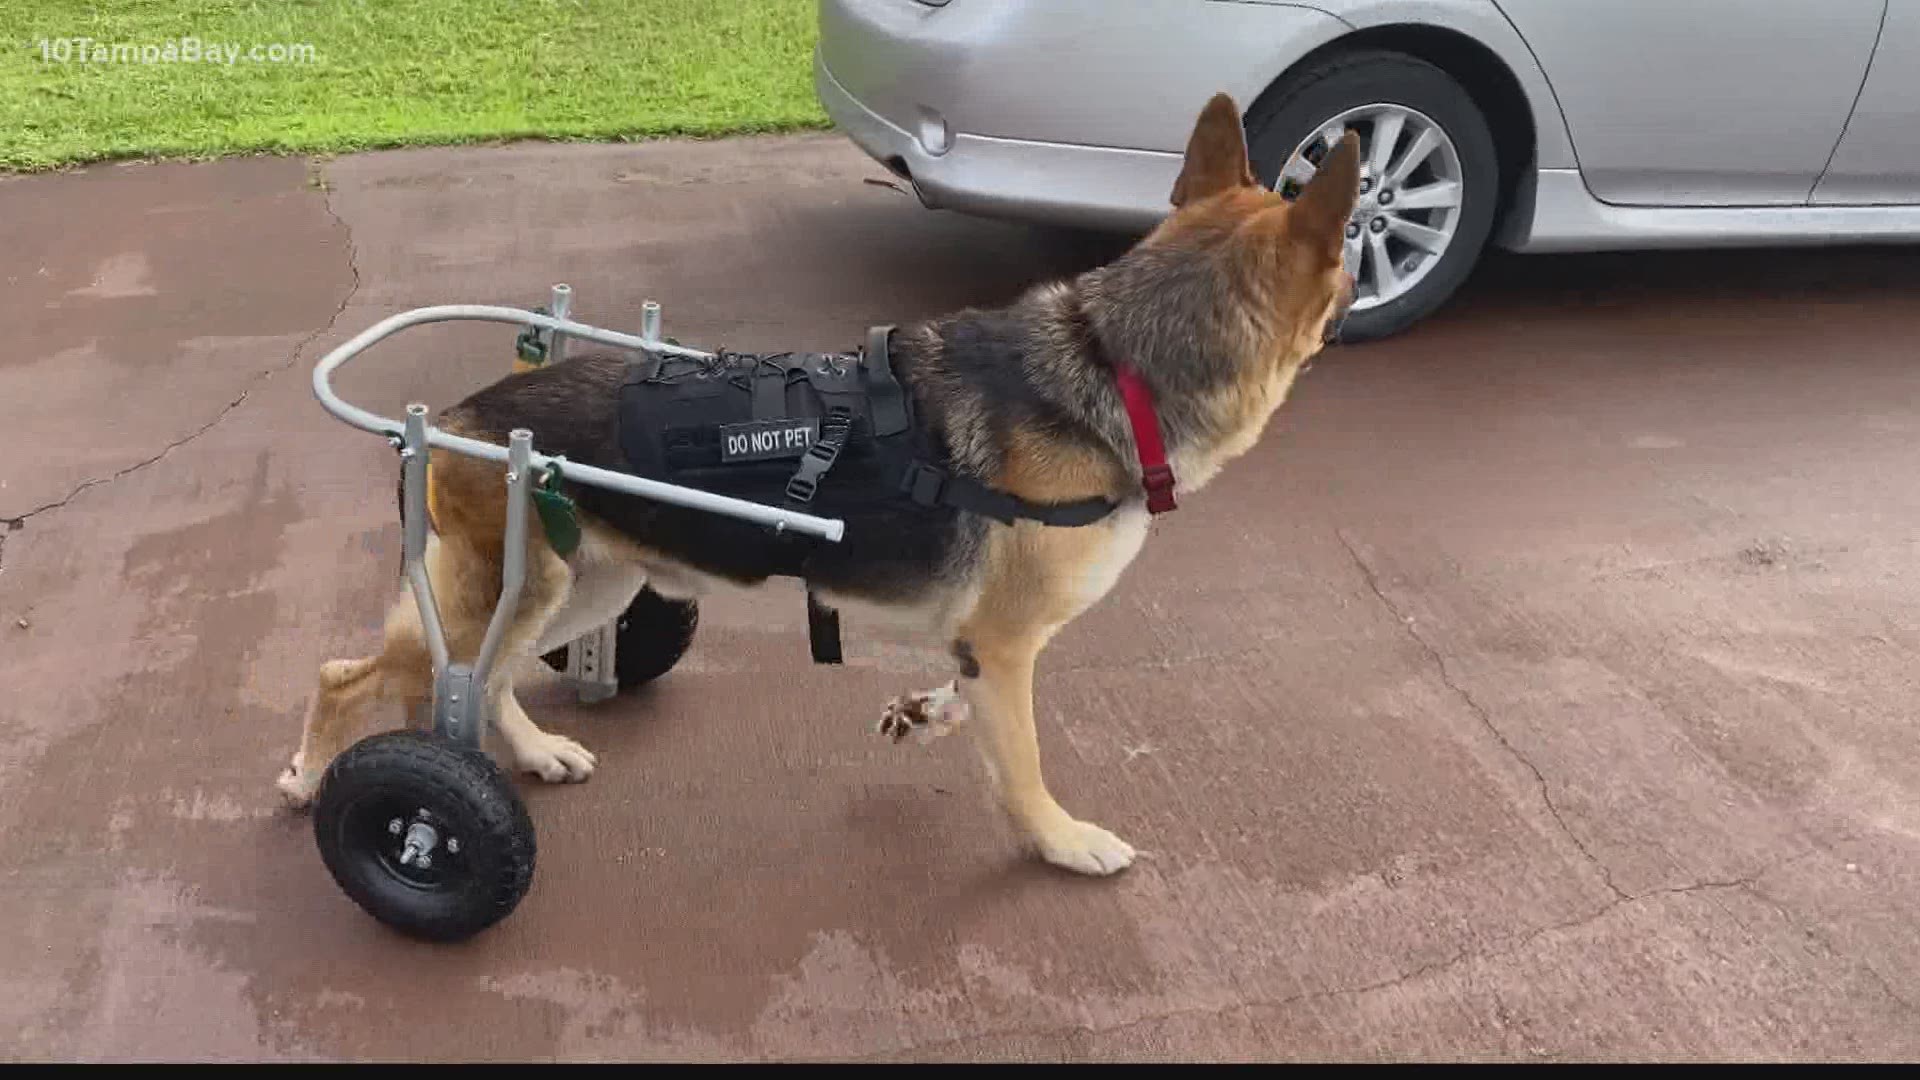 A personal project to help her dog walk again may turn into a non-profit to help other disabled dogs.